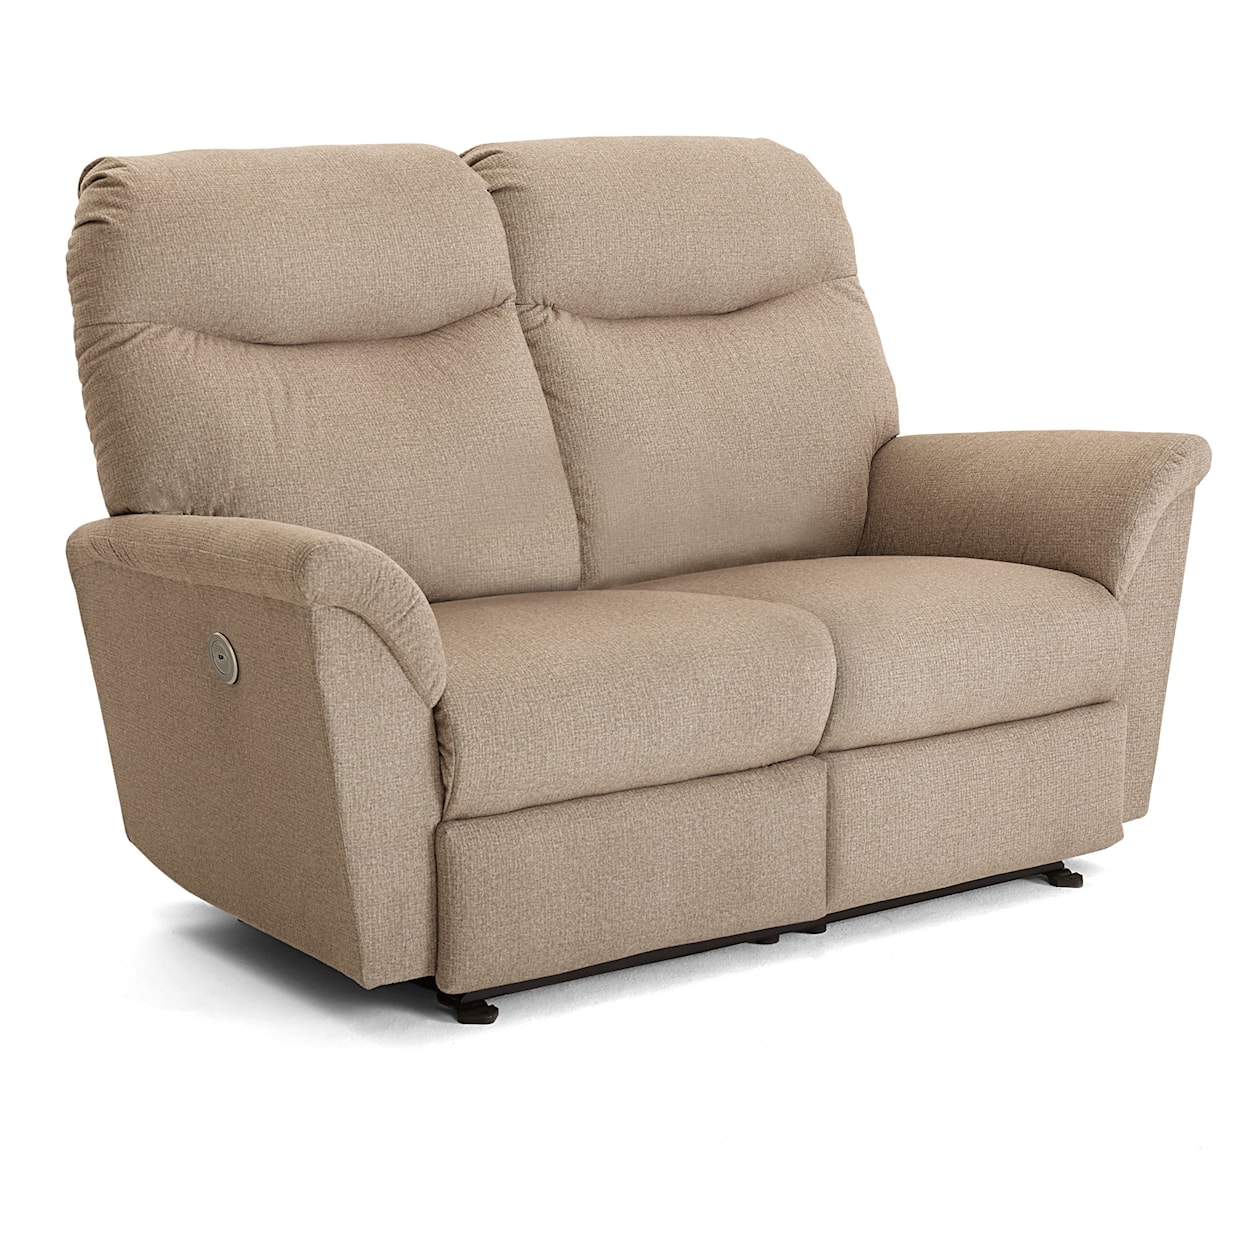 Best Home Furnishings Caitlin Power Reclining Space Saver Loveseat